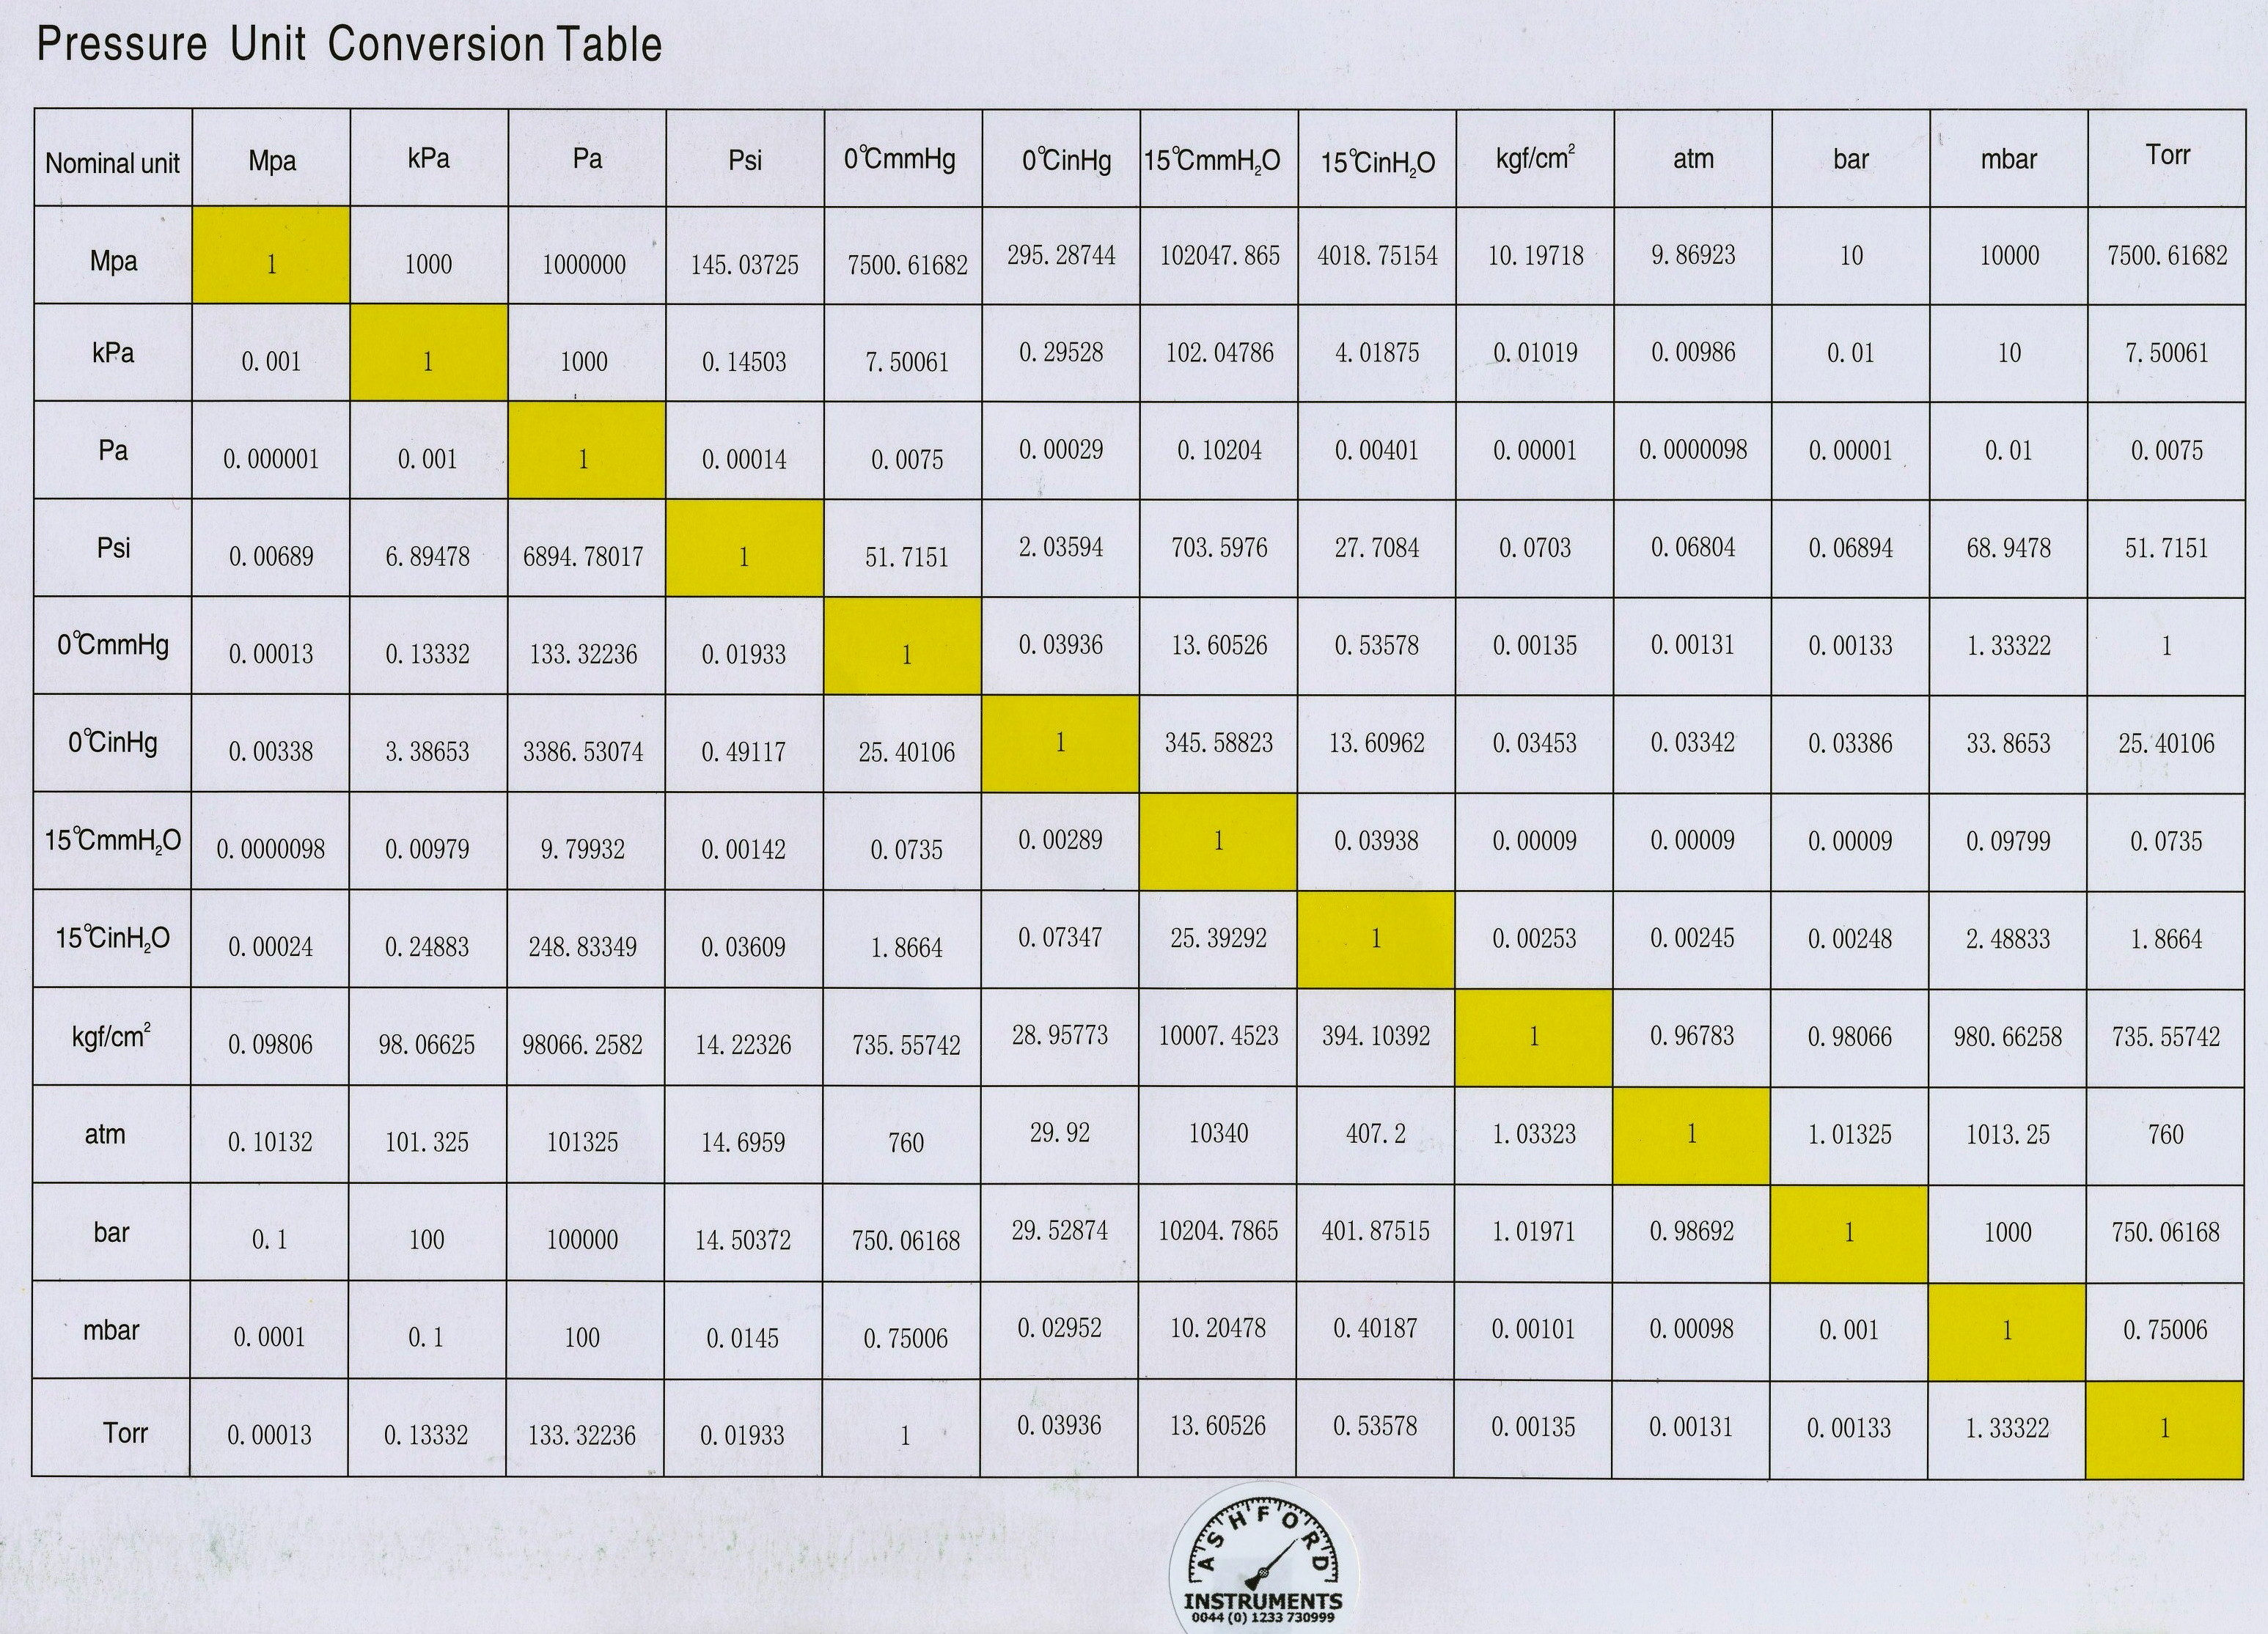 Customary Conversion Chart For Kids